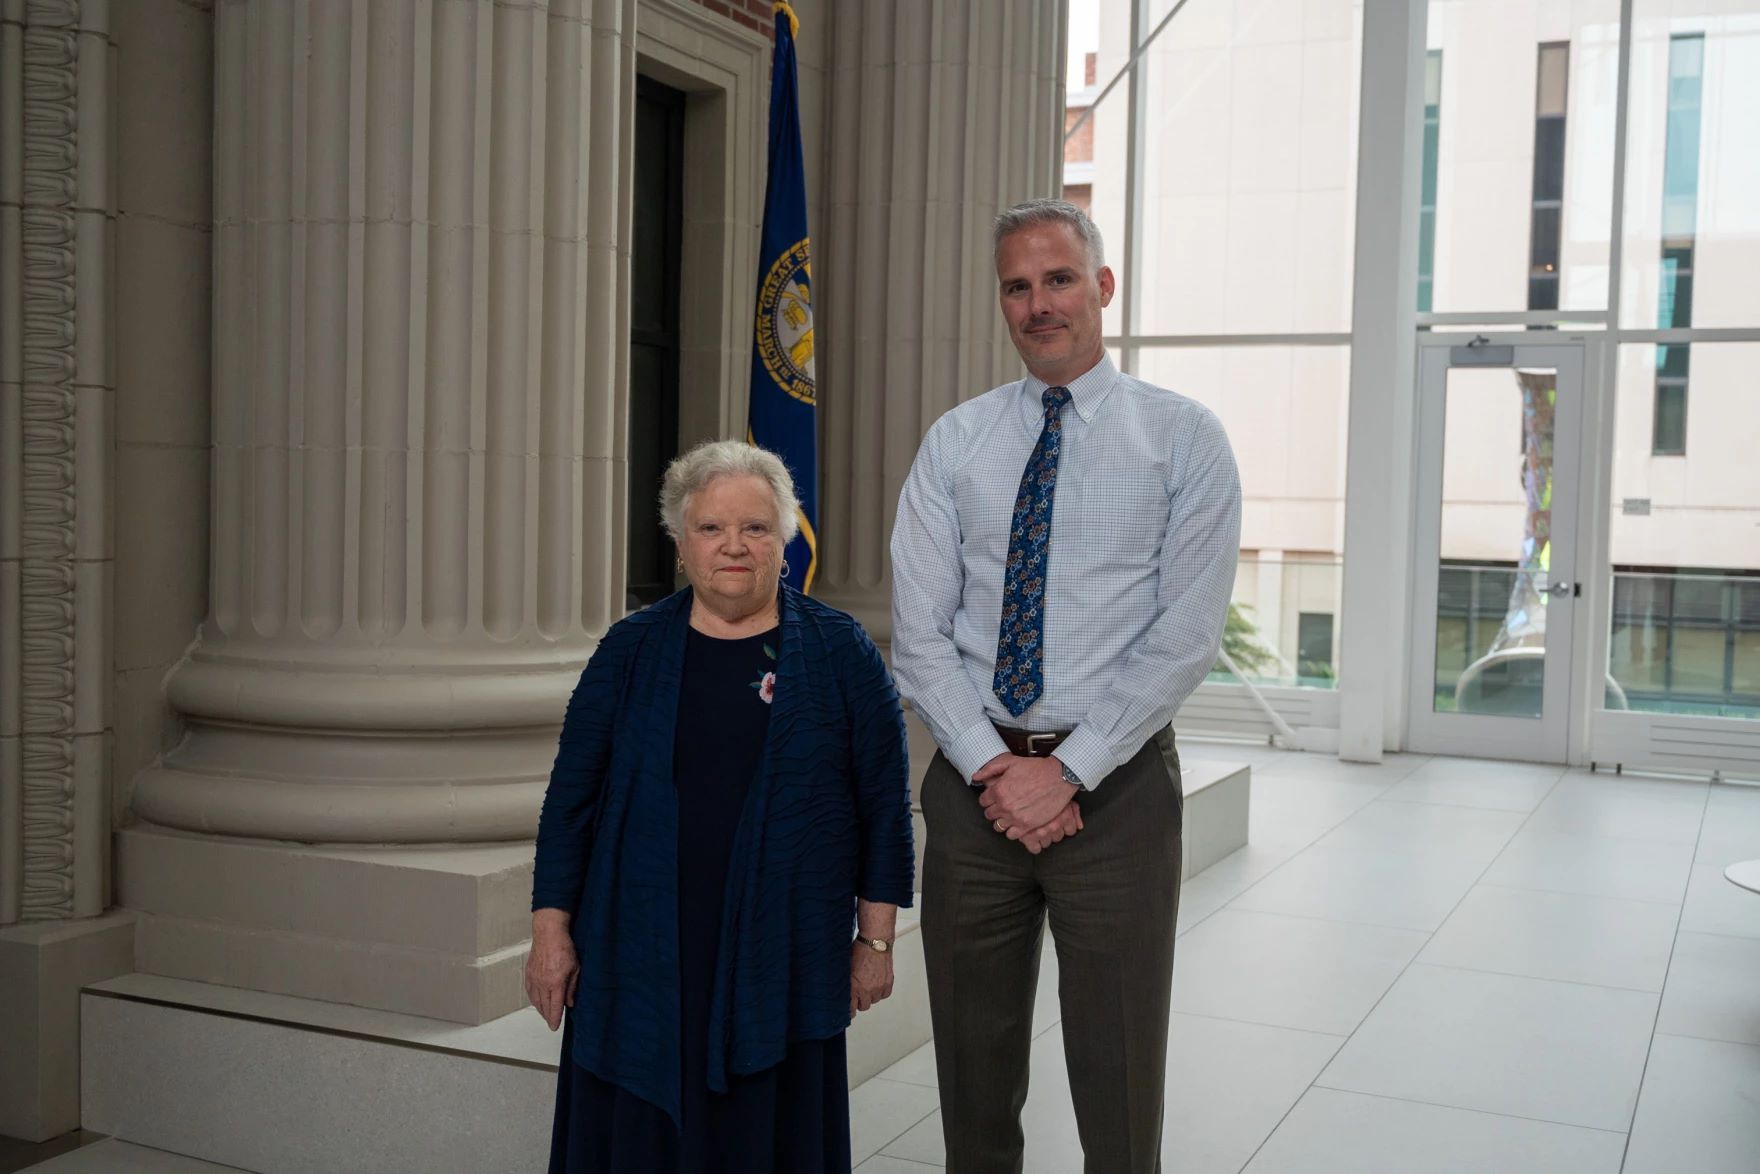 Eleanor Rogan, a professor of public health, and Don Coulter, a professor of pediatric oncology